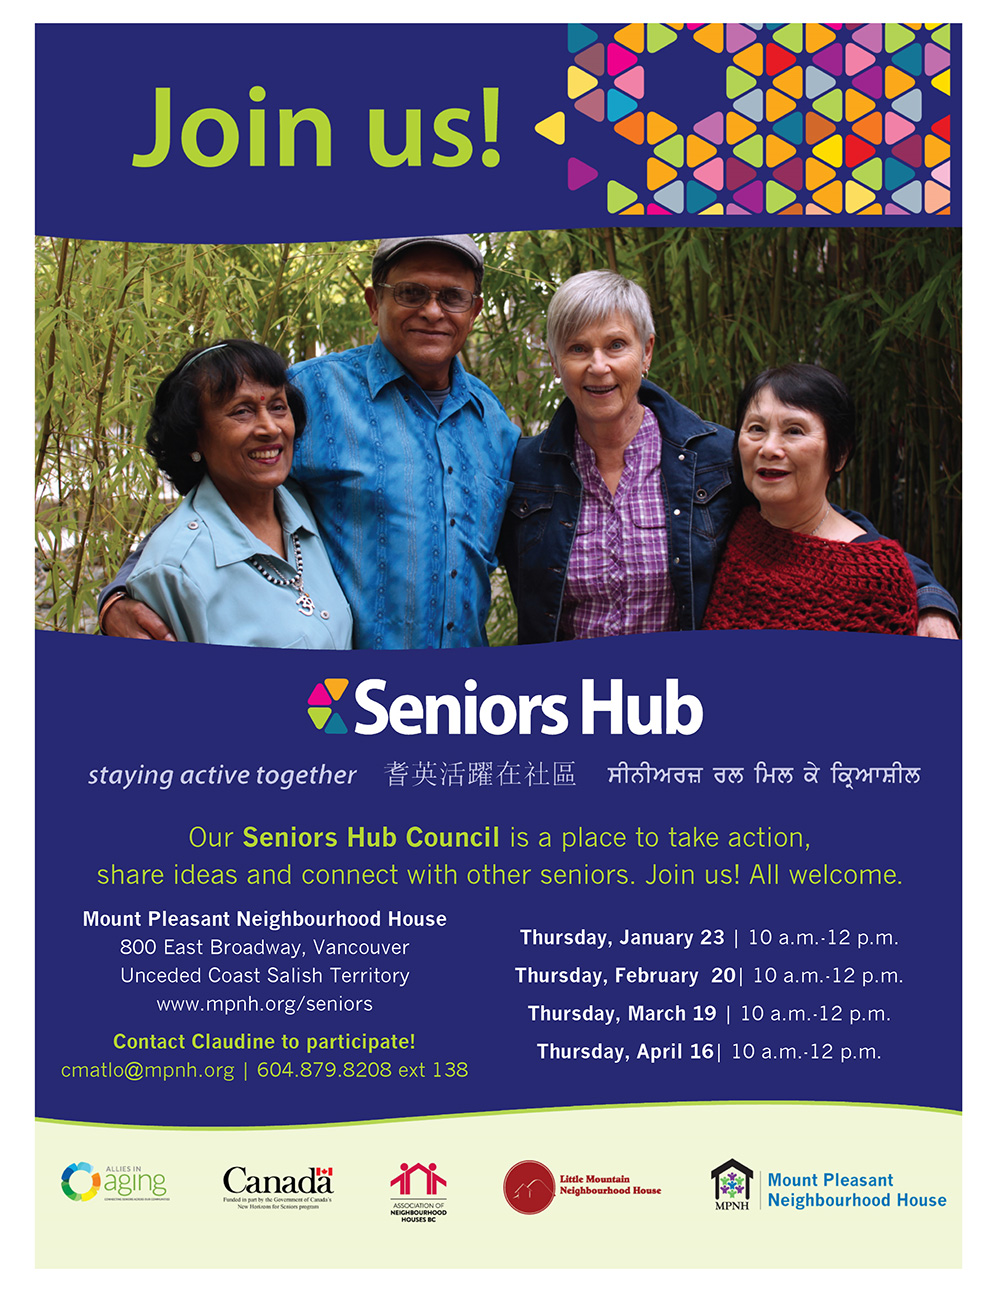 Poster for the Seniors Hub showing four mature men and women looking happy